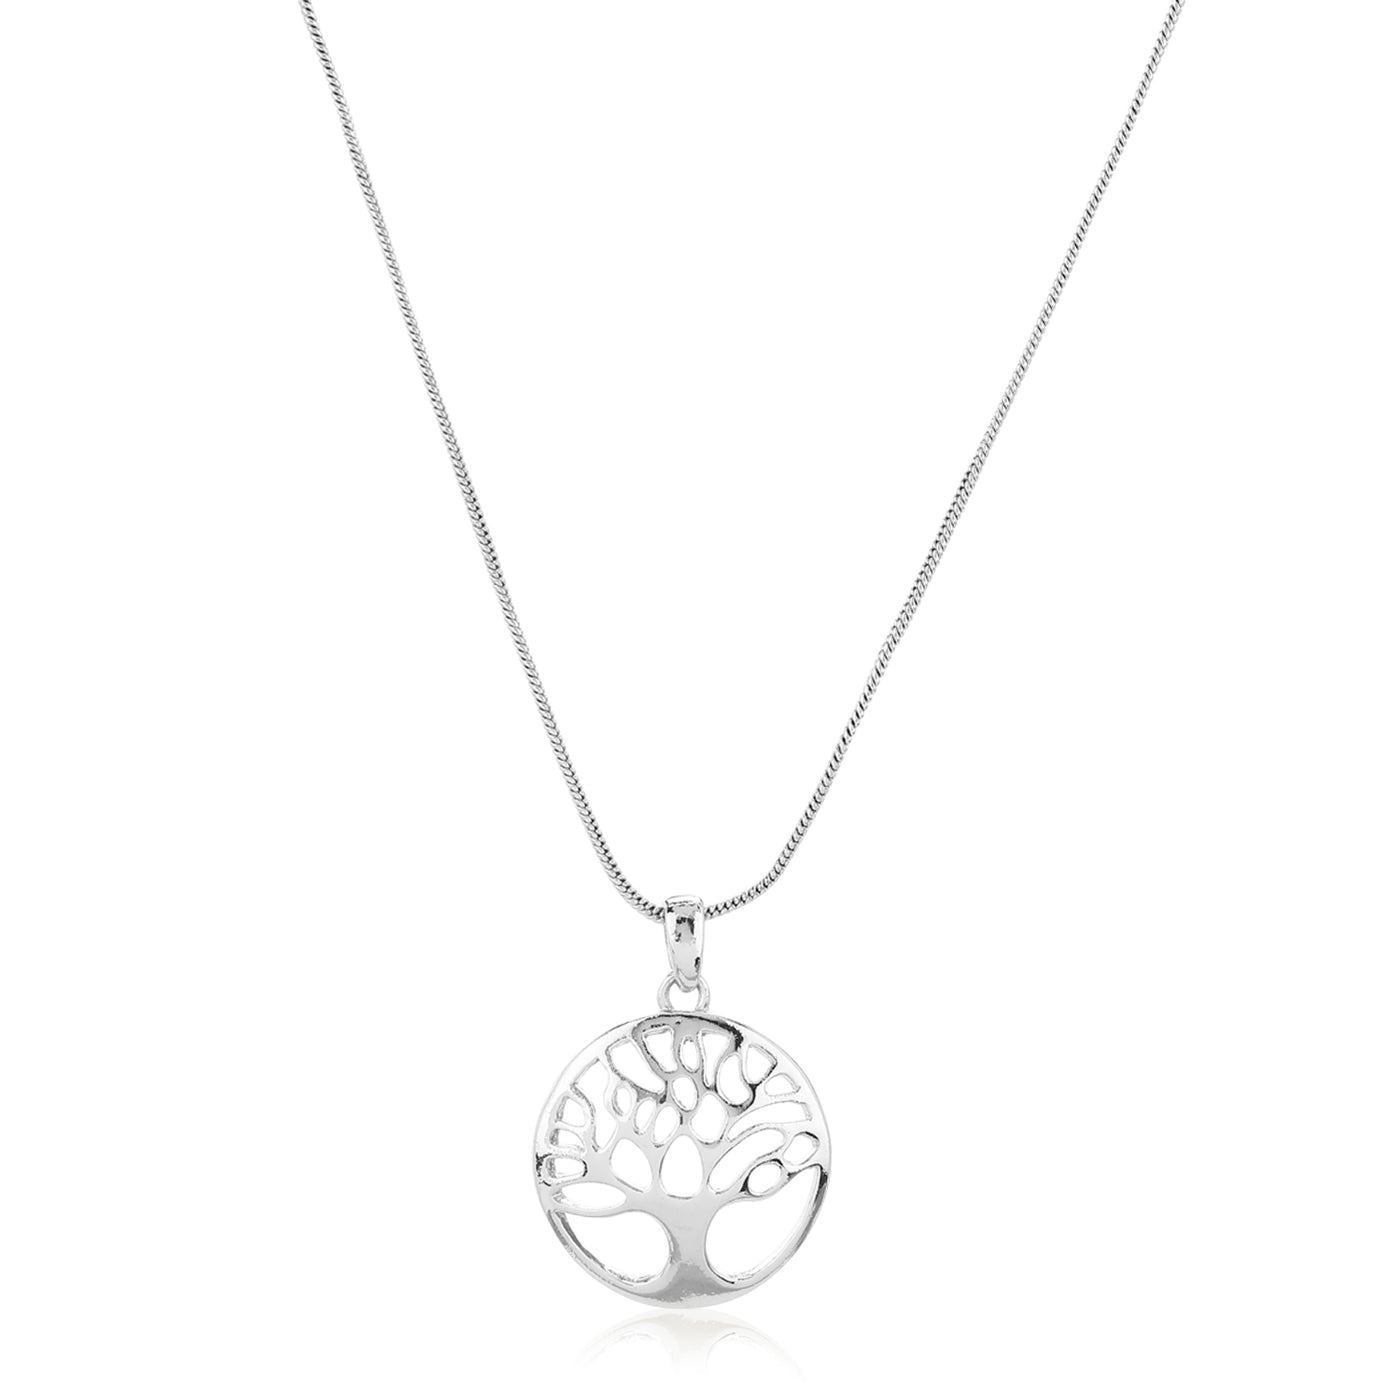 Estele - Tree of Life Silver Plated Pendant for Women / Girls